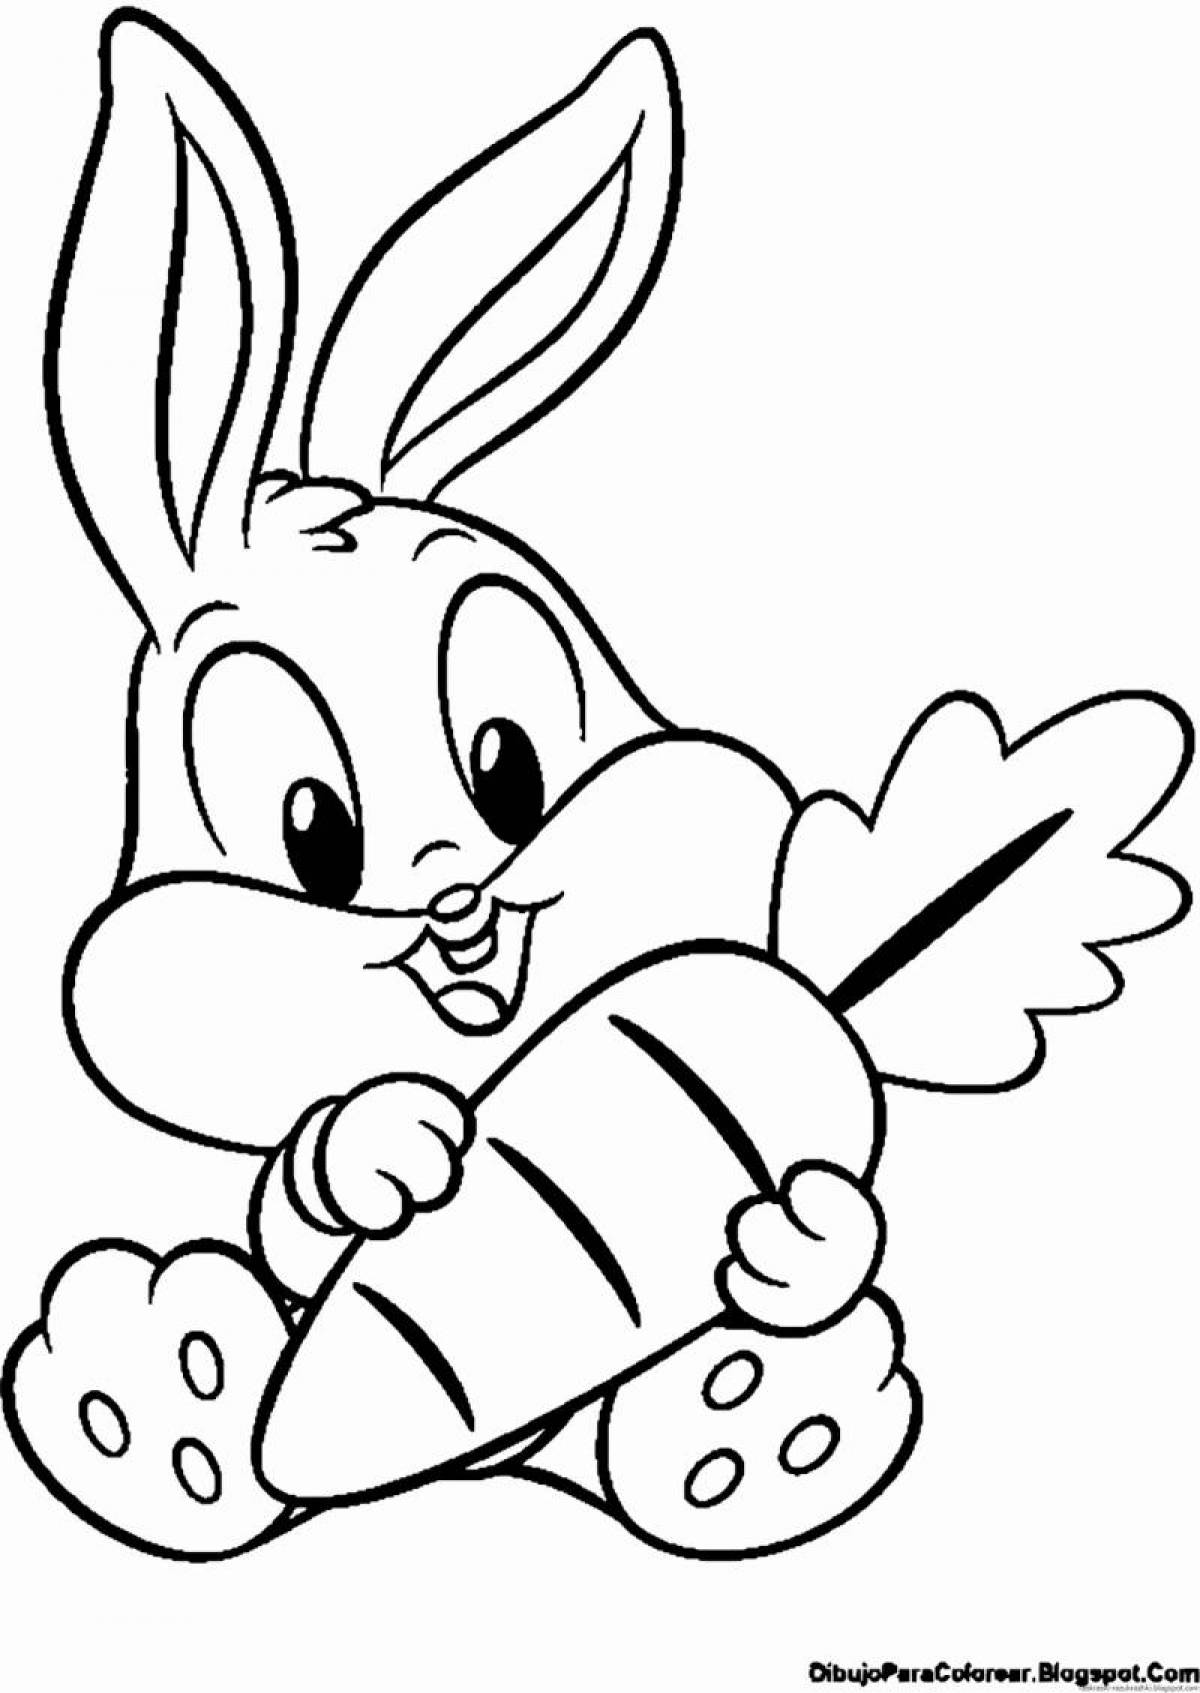 Happy bunny coloring pages for kids